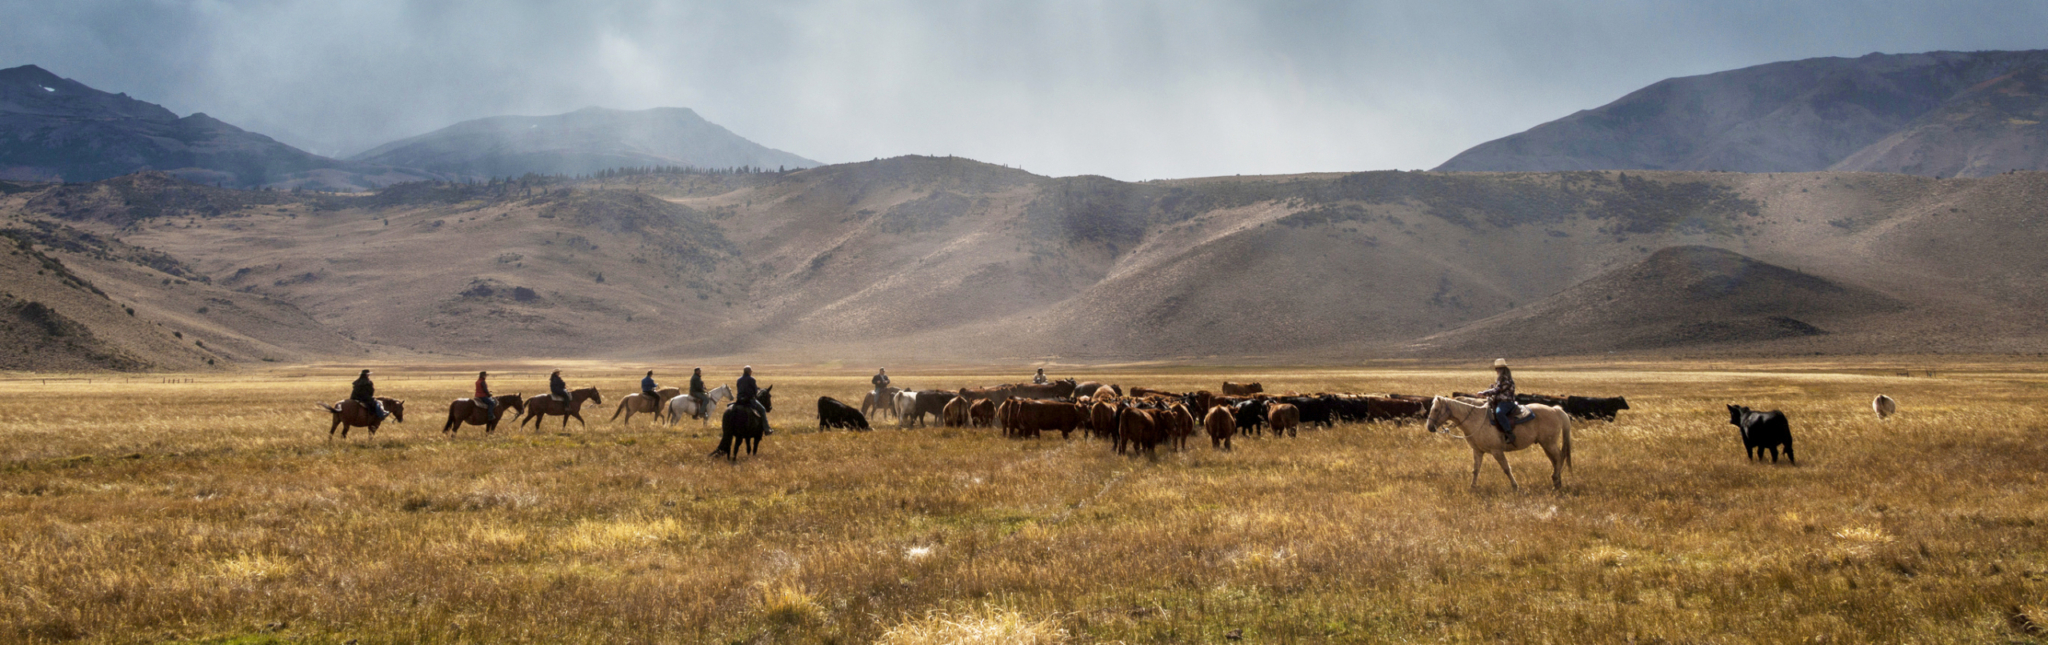 hunewill ranch with cowboys and cattle